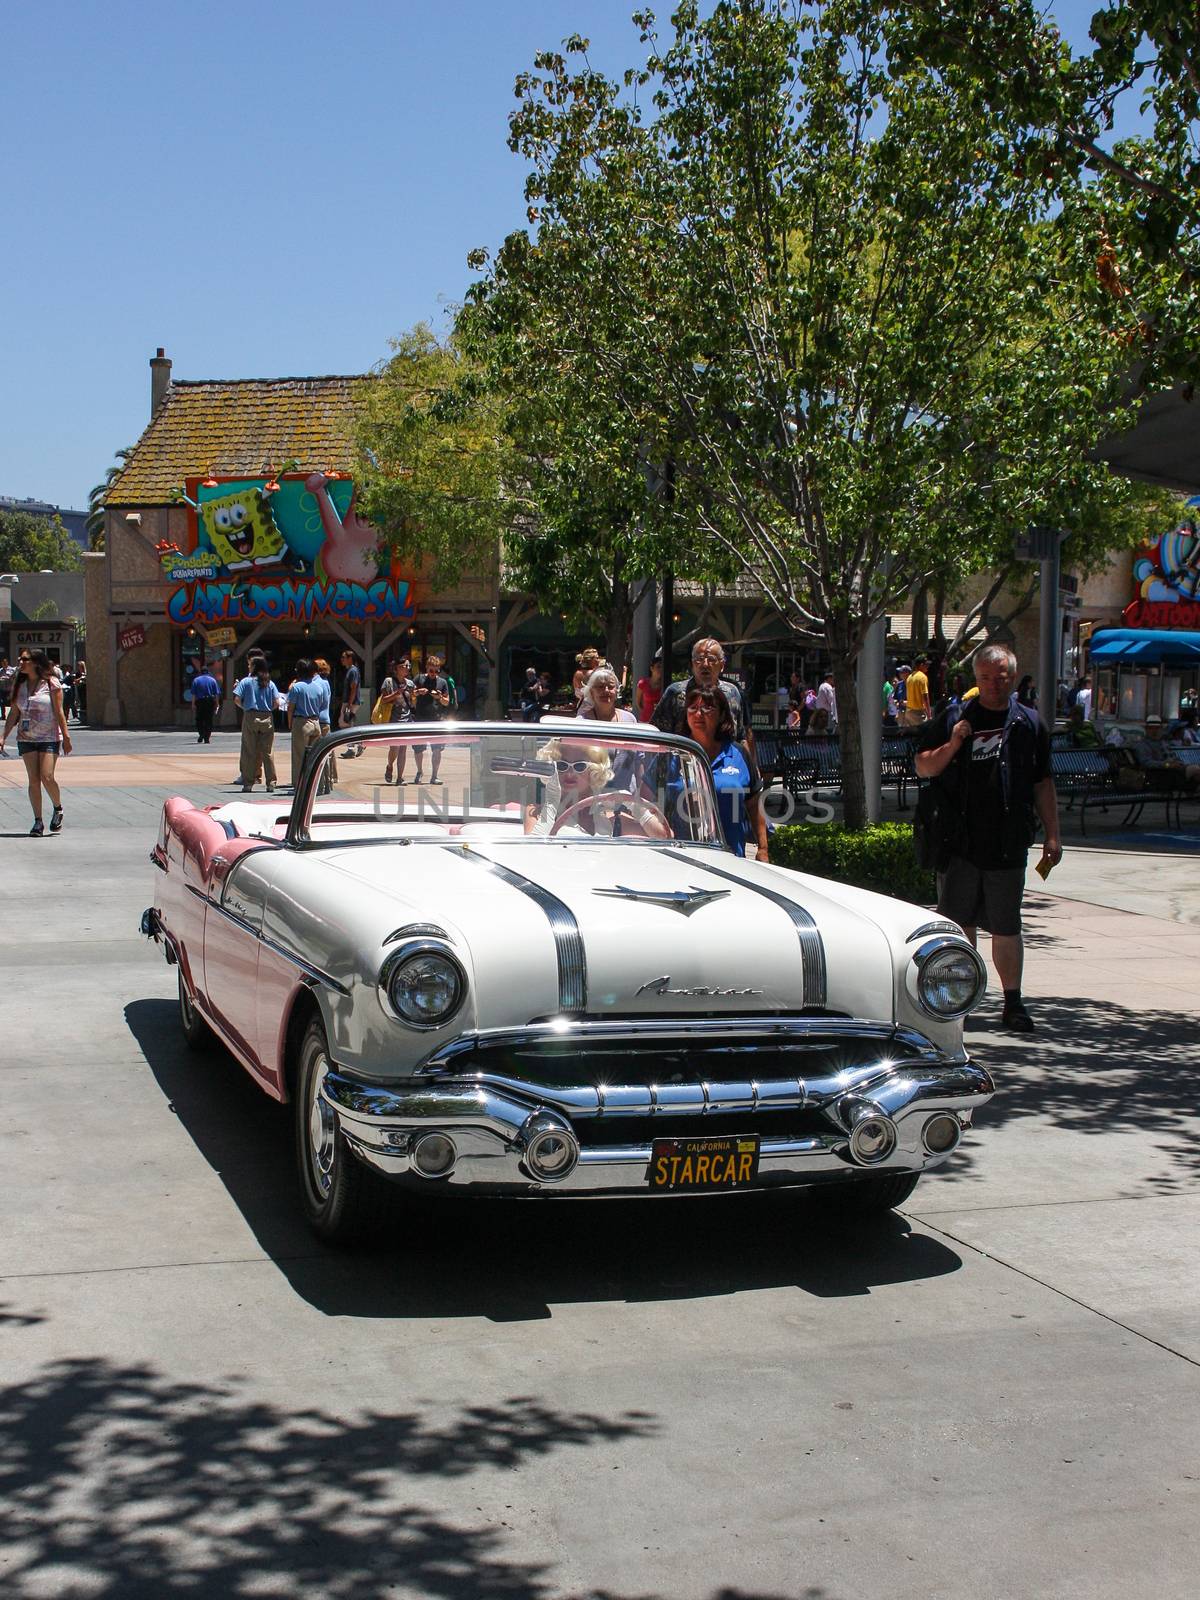 Los Angeles, CA, United States - 15 June 2010. Model in an image of Marilyn Monroe drives through the streets of Universal Studios in Los Angeles Hollywood . Beige Pontiac in retro style perfectly with her dress, hair and glasses.